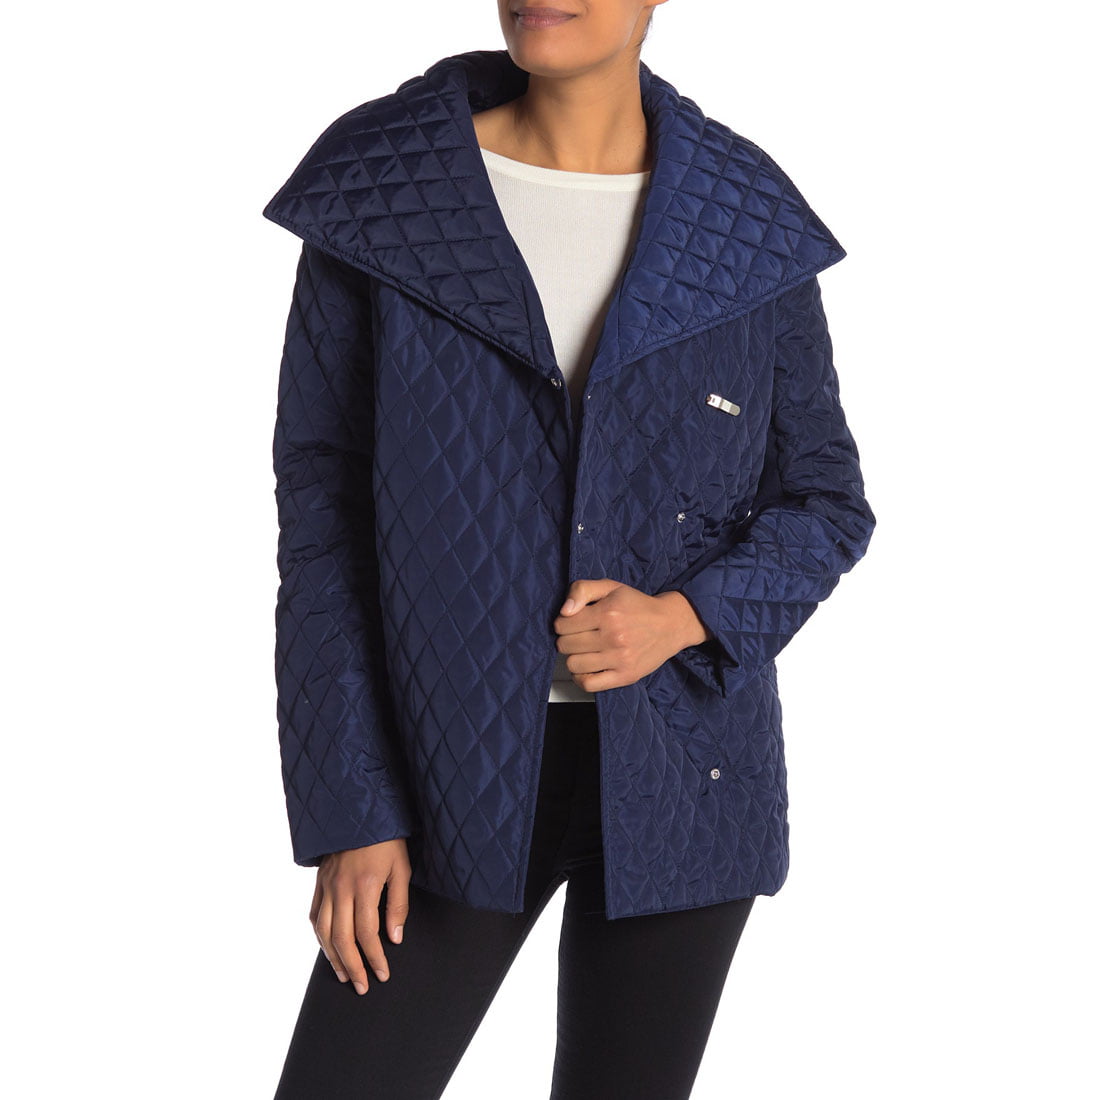 Coffeeshop - Coffee Shop Asymmetrical Belted Quilted Jacket, Sapphire ...